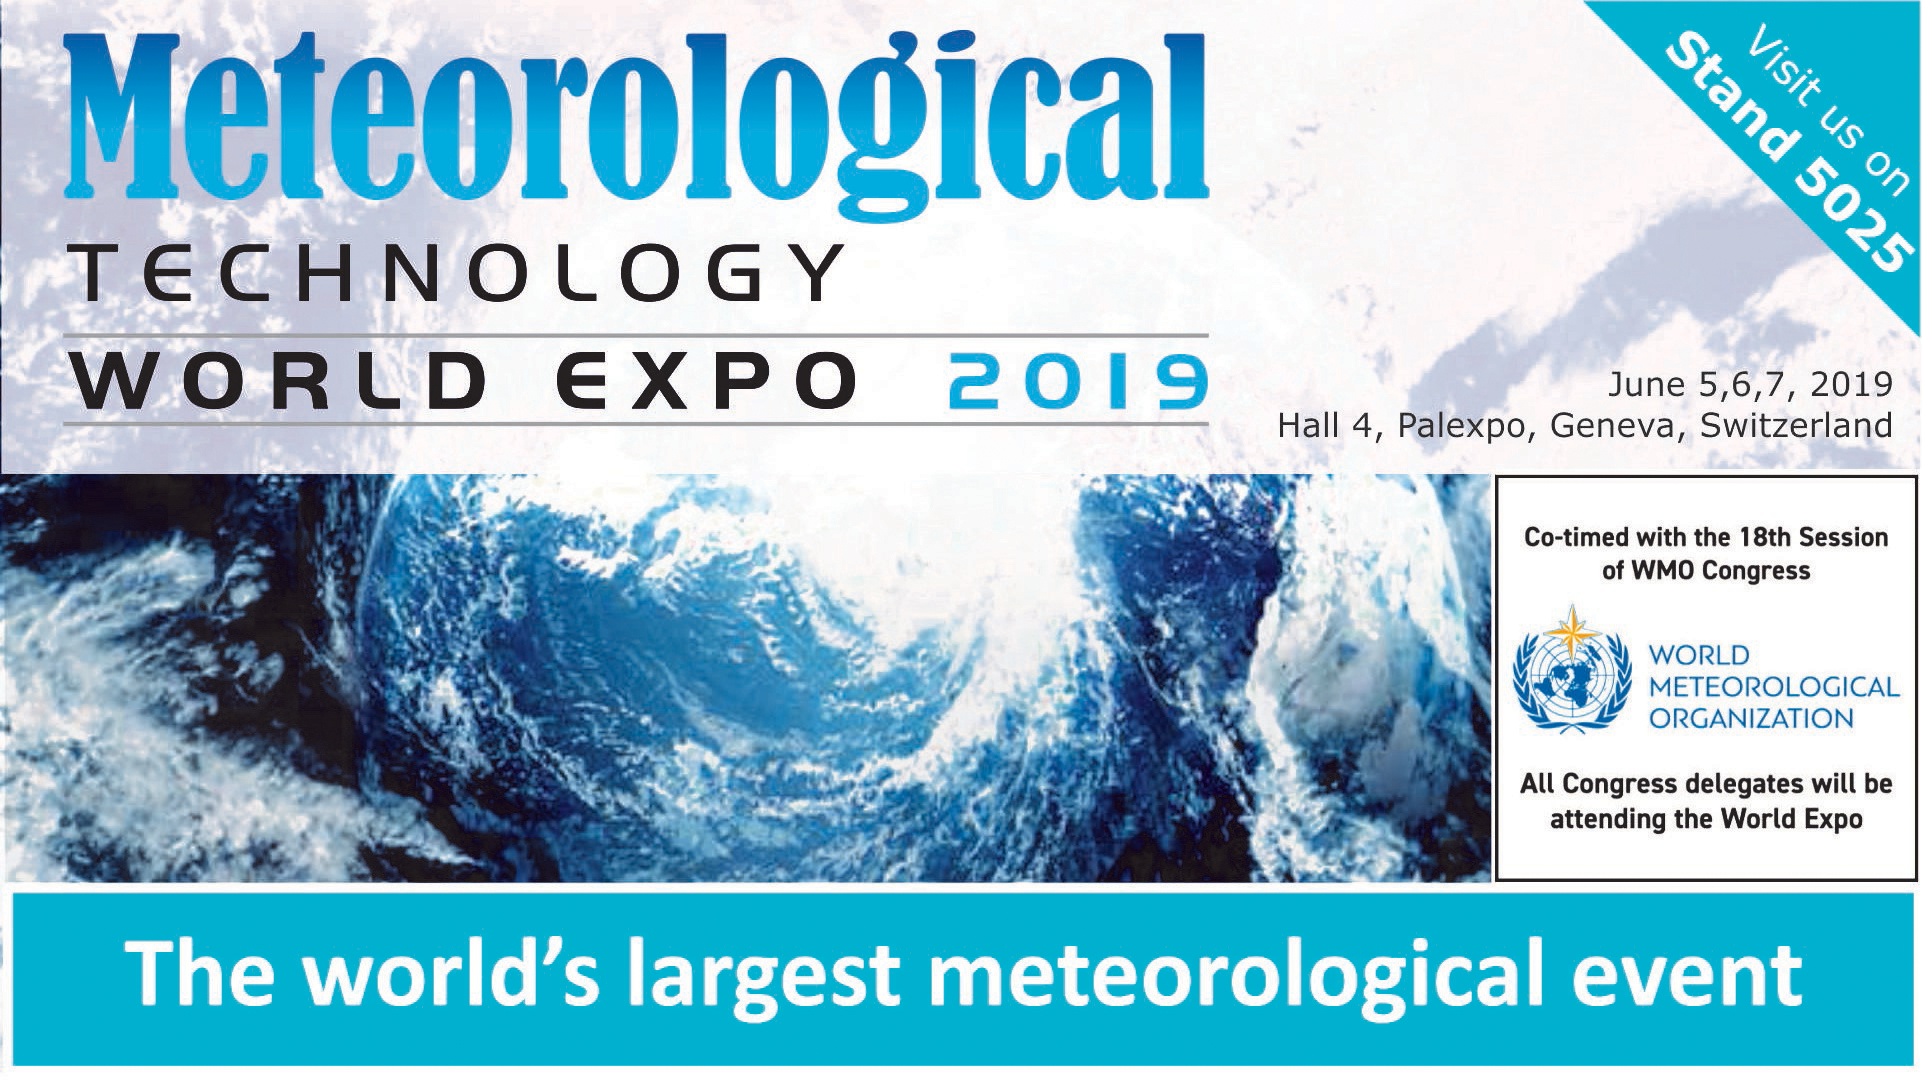 See you in Geneva from 5th to 7th of June: CAE will be at the Meteorological Technology World Expo